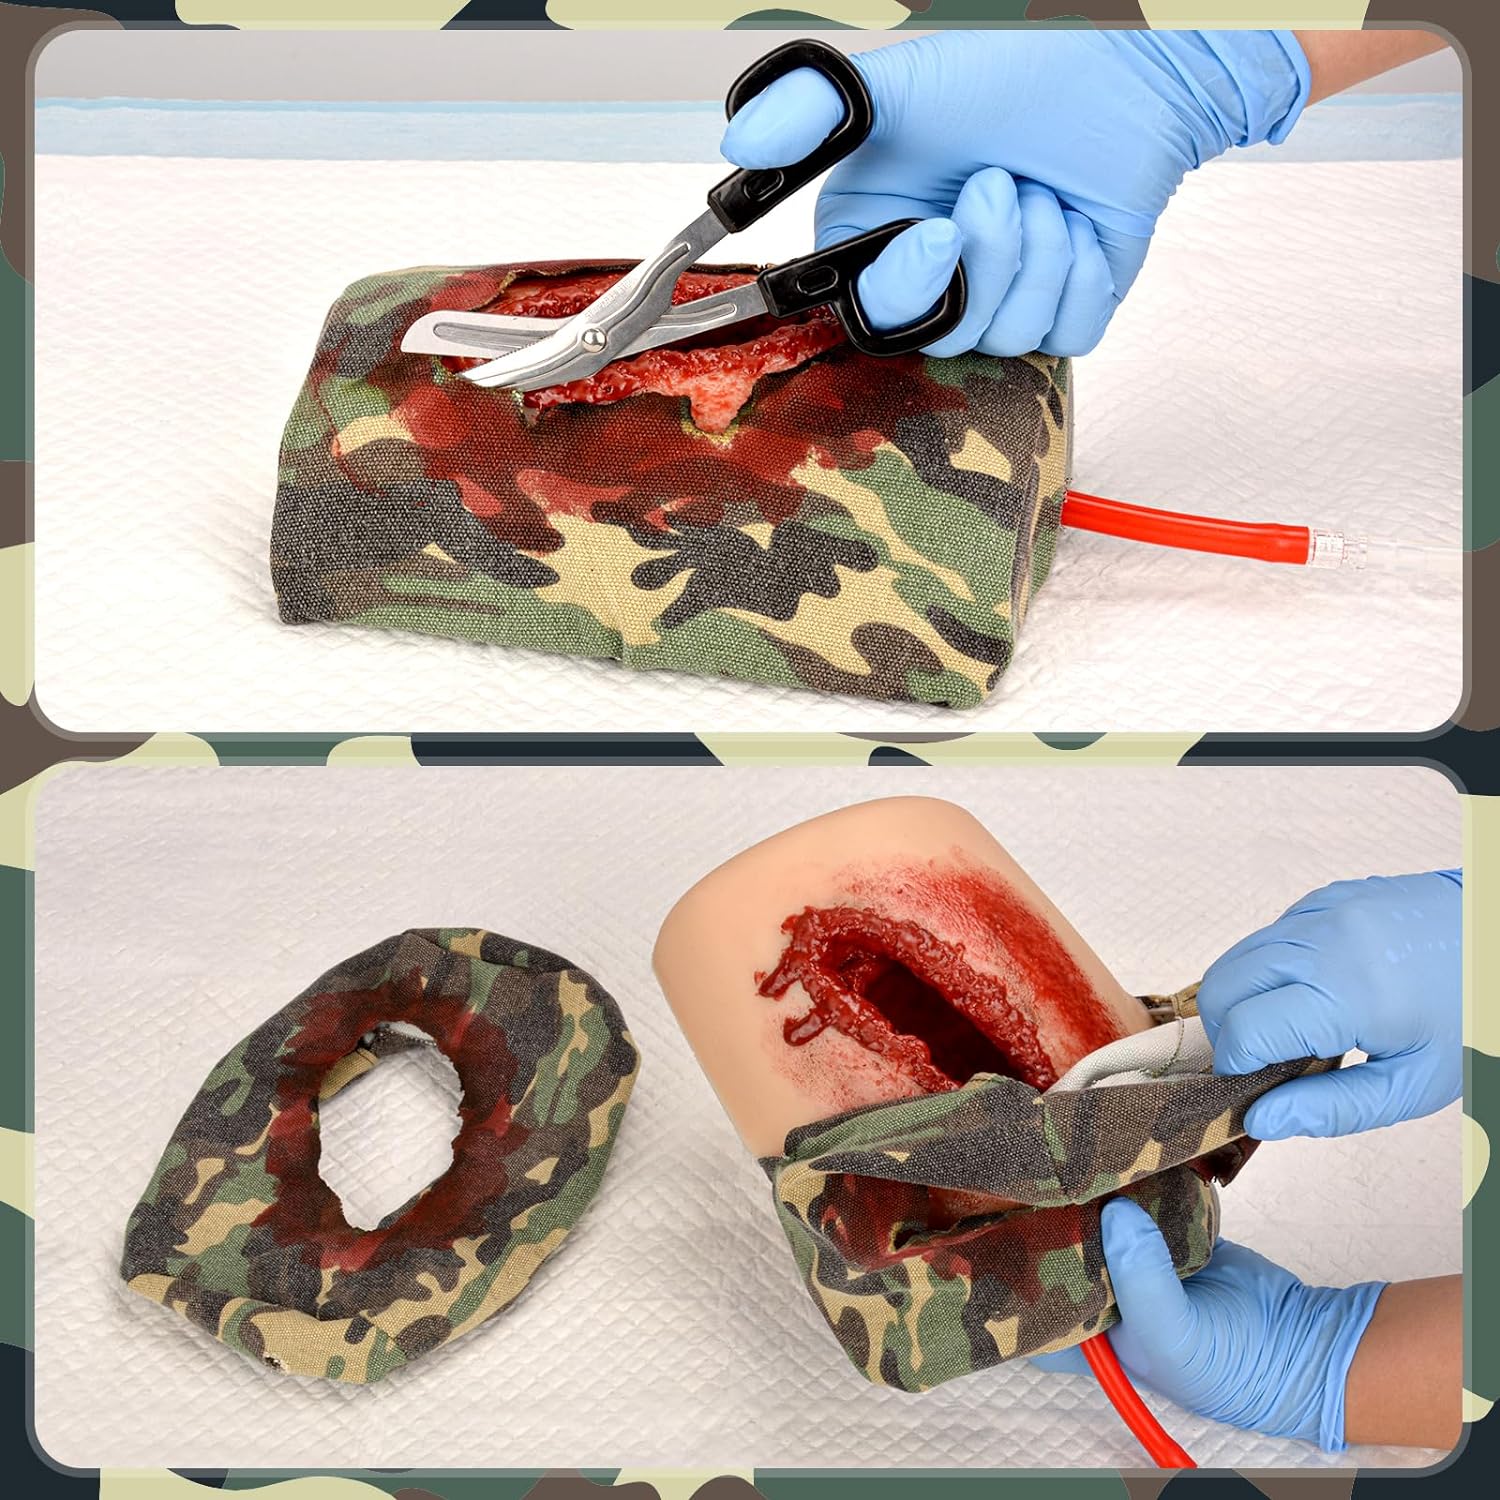 Thigh Laceration Wound Packing Trainer to Bleed Control for Medical Education, First Aid Emergency Pracitce, Military Trauma Trainner